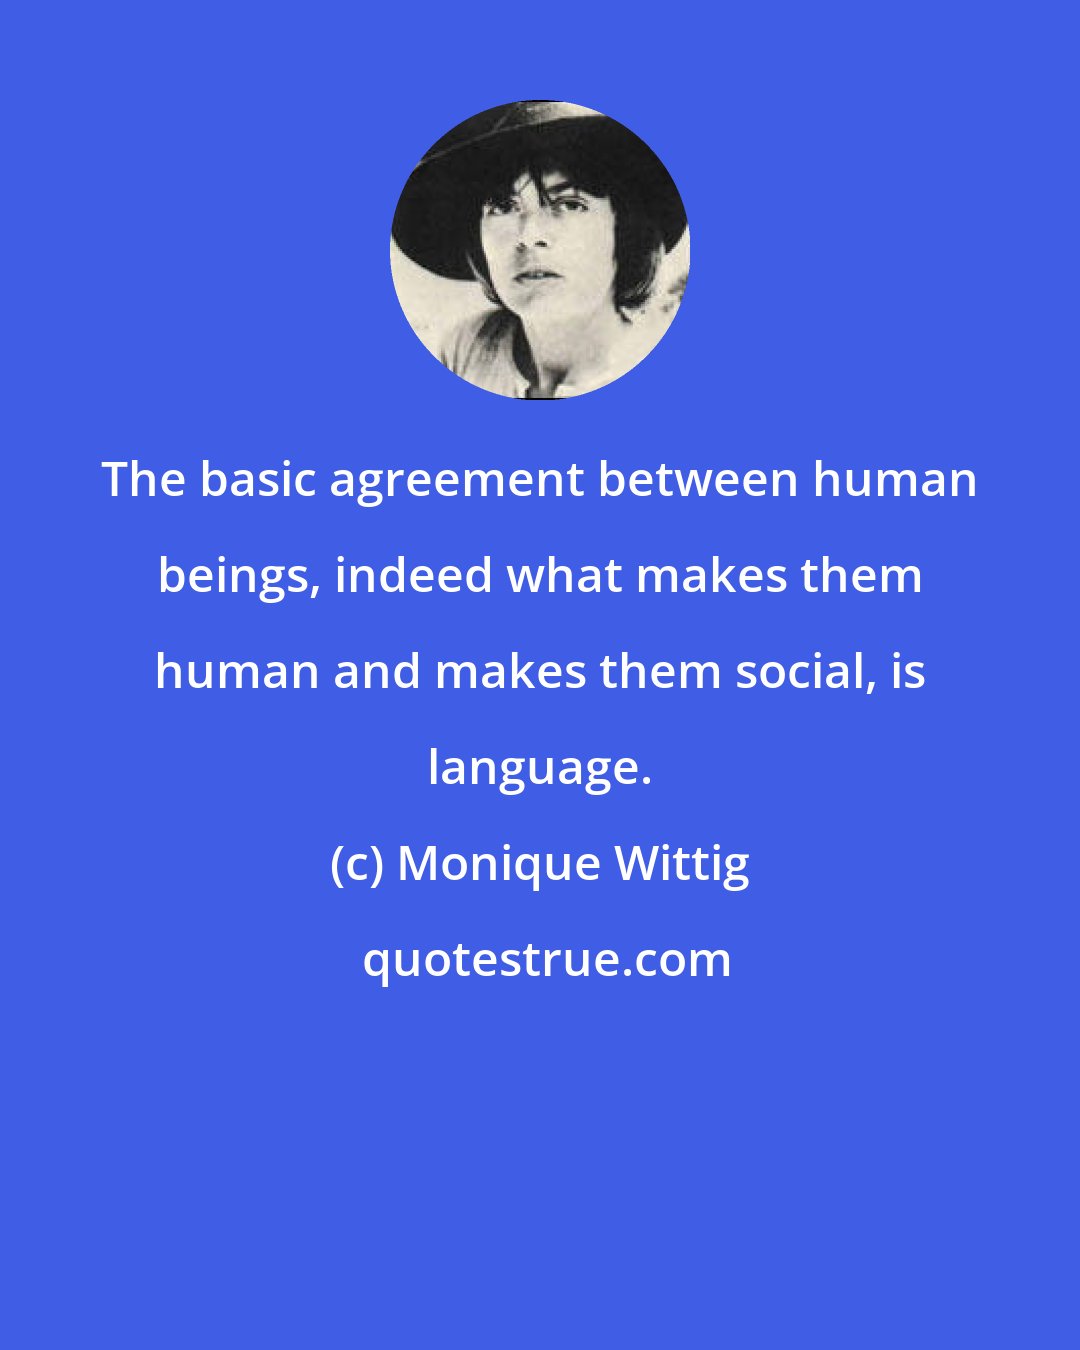 Monique Wittig: The basic agreement between human beings, indeed what makes them human and makes them social, is language.